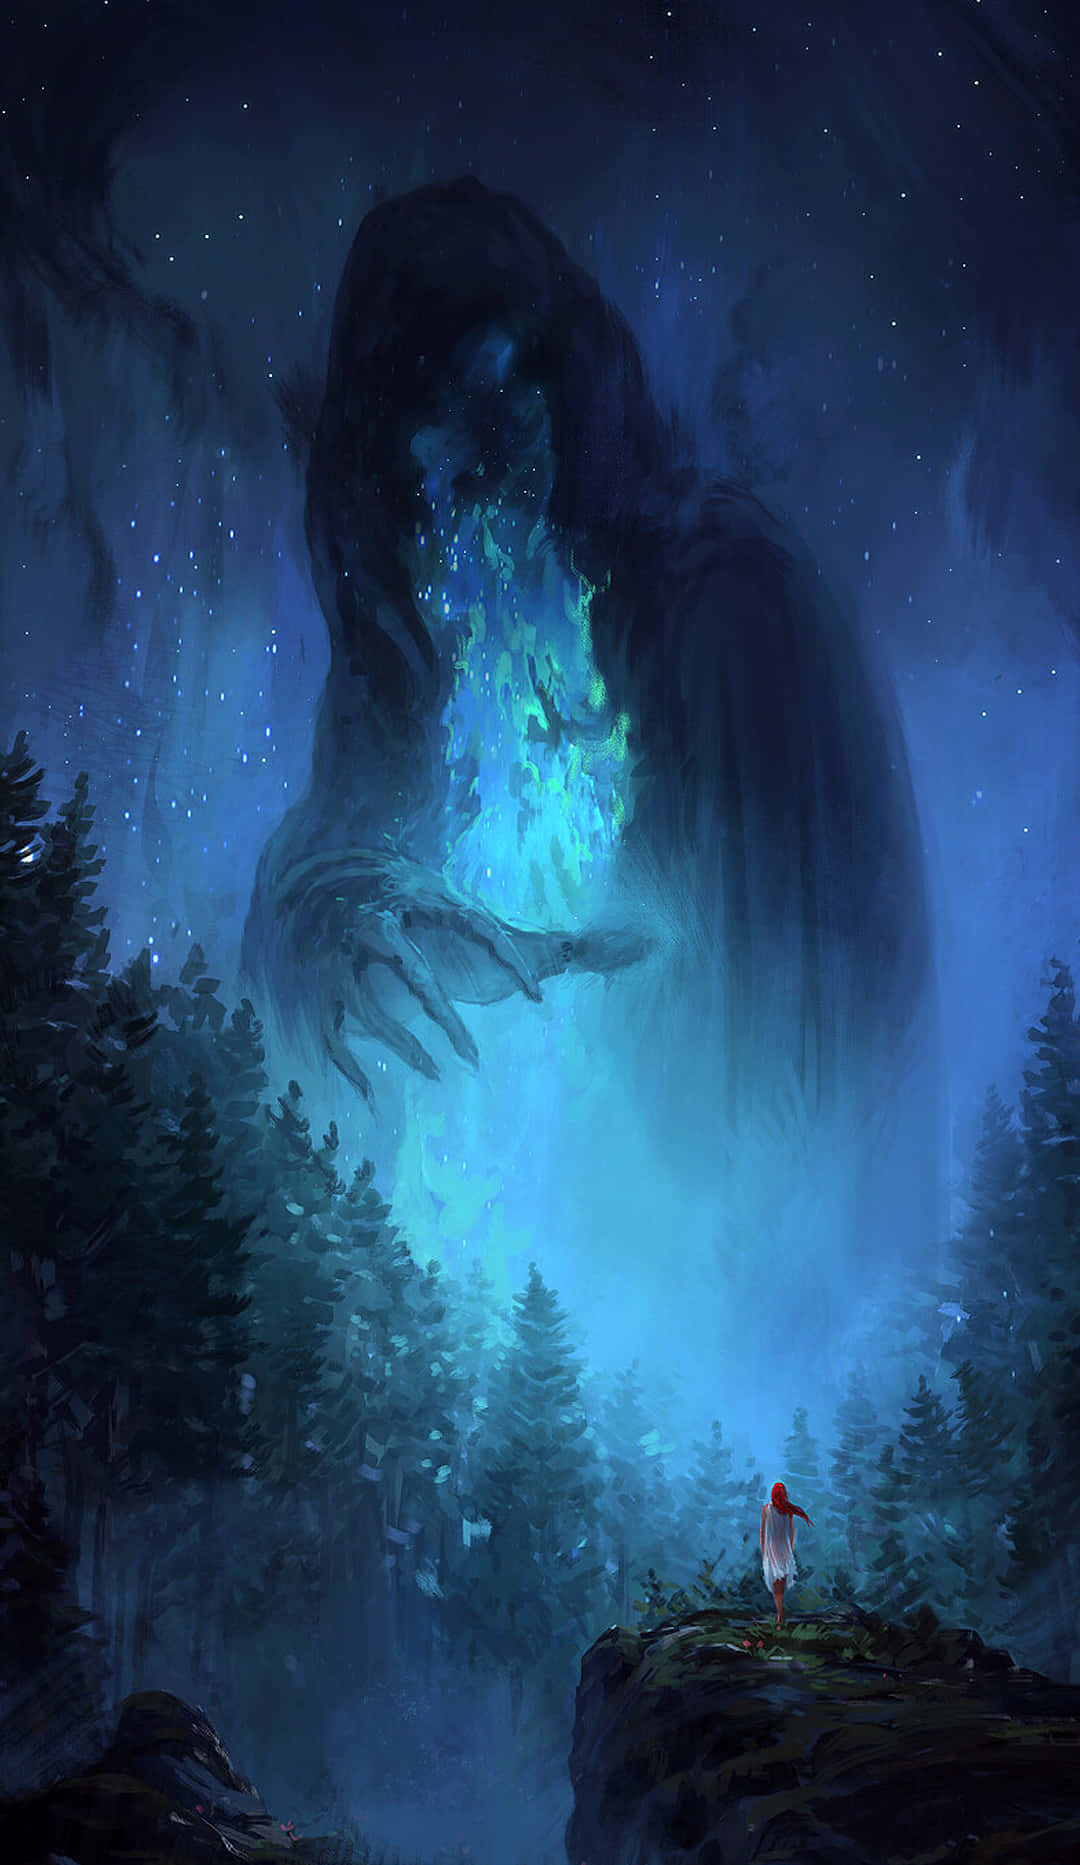 A Man Is Standing In The Forest With A Giant Monster In The Sky Wallpaper